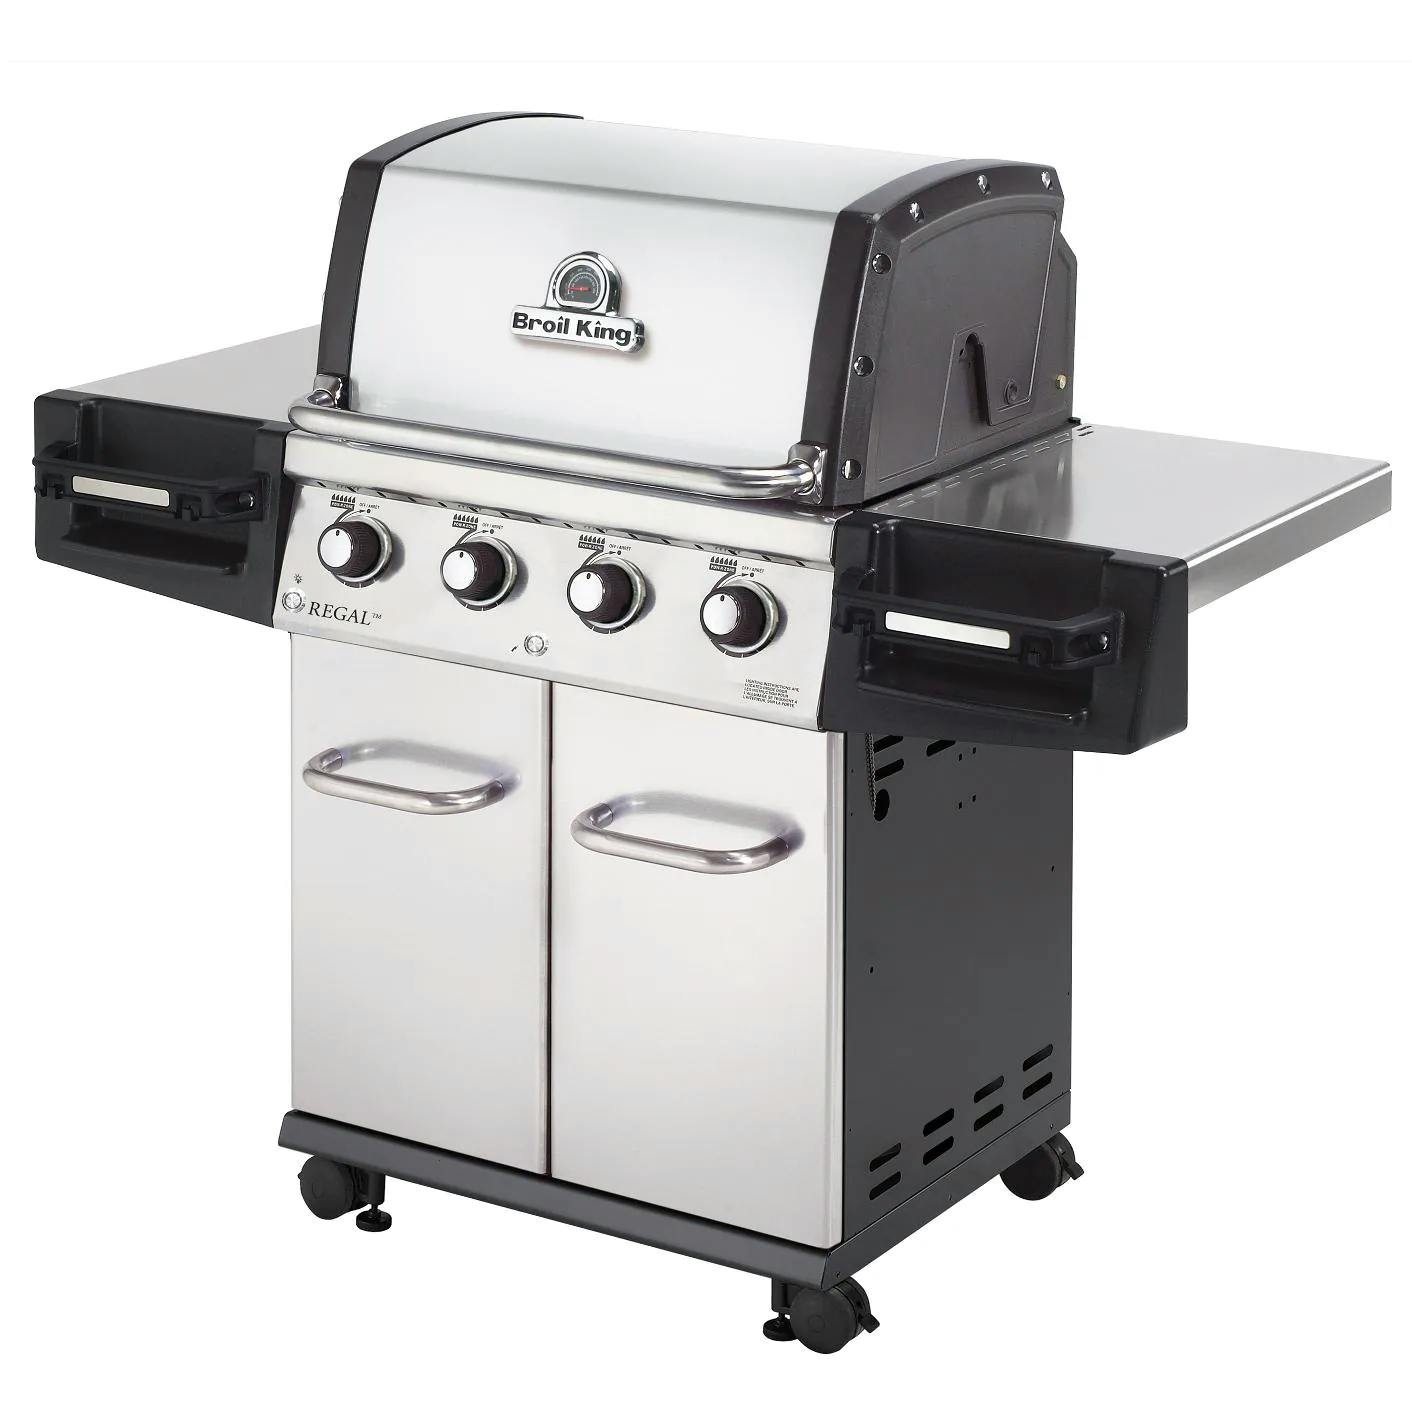 Broil King Regal S420 Pro Gas Grill Stainless Steel